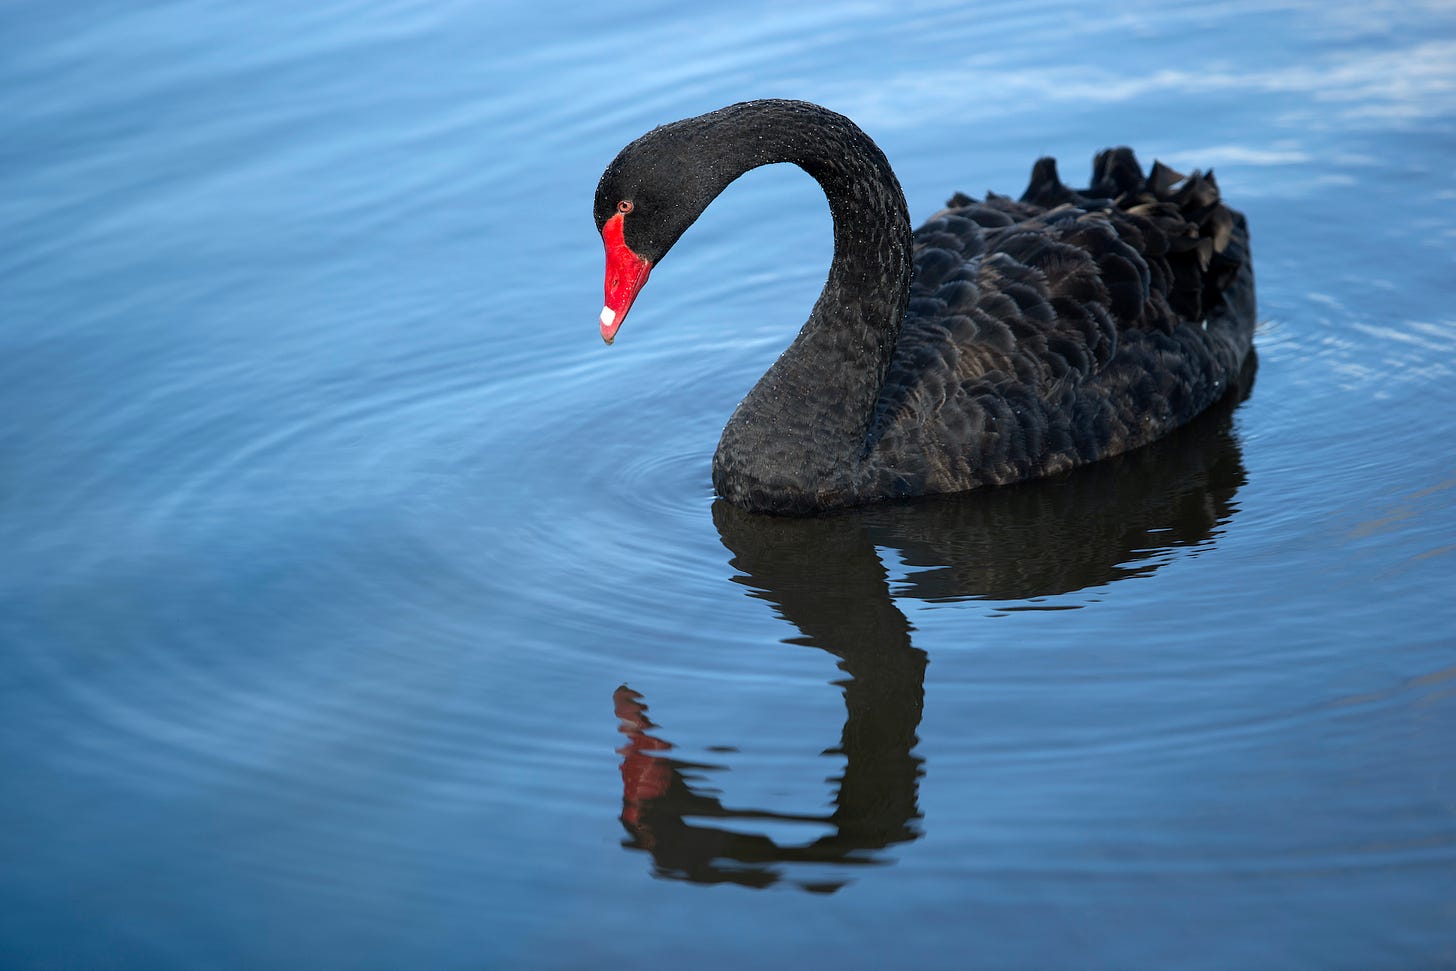 What Are Lessons for Leaders from This Black Swan Crisis? - HBS Working  Knowledge